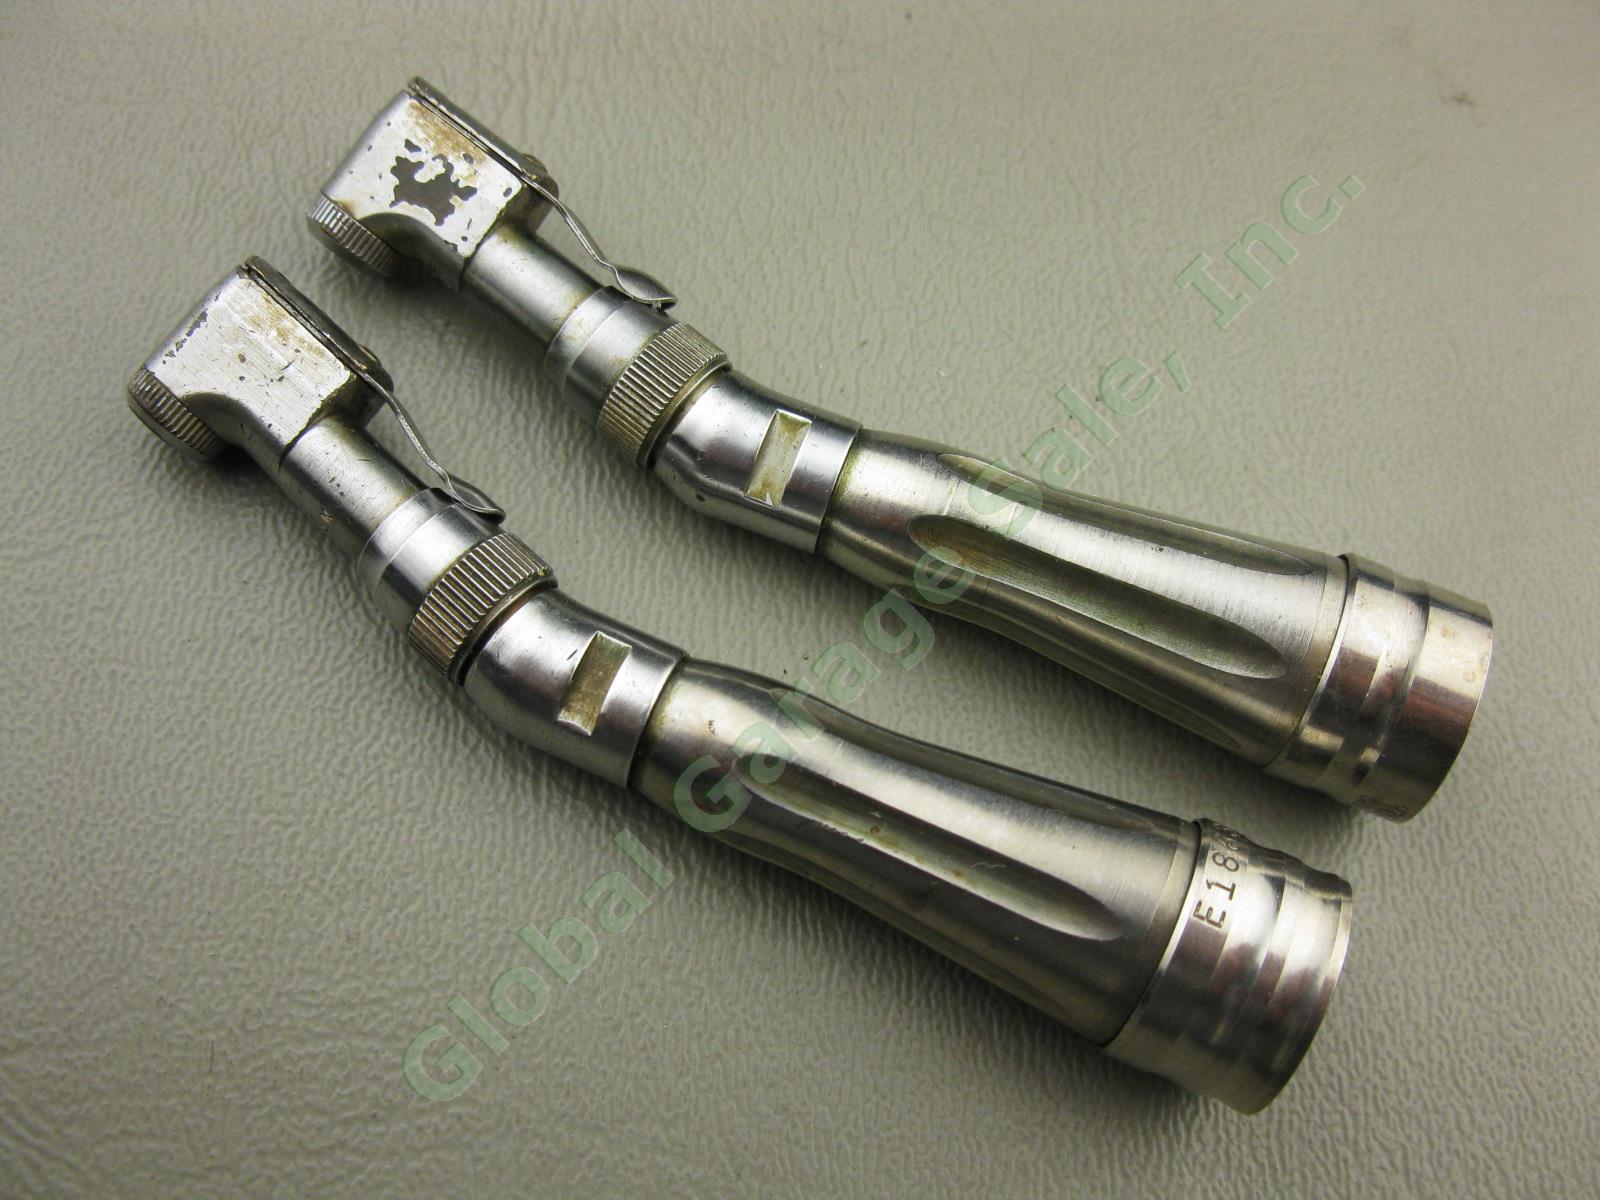 2 Contra Angle Attachments W/ Swing Latch Heads For Star Titan Dental Handpieces